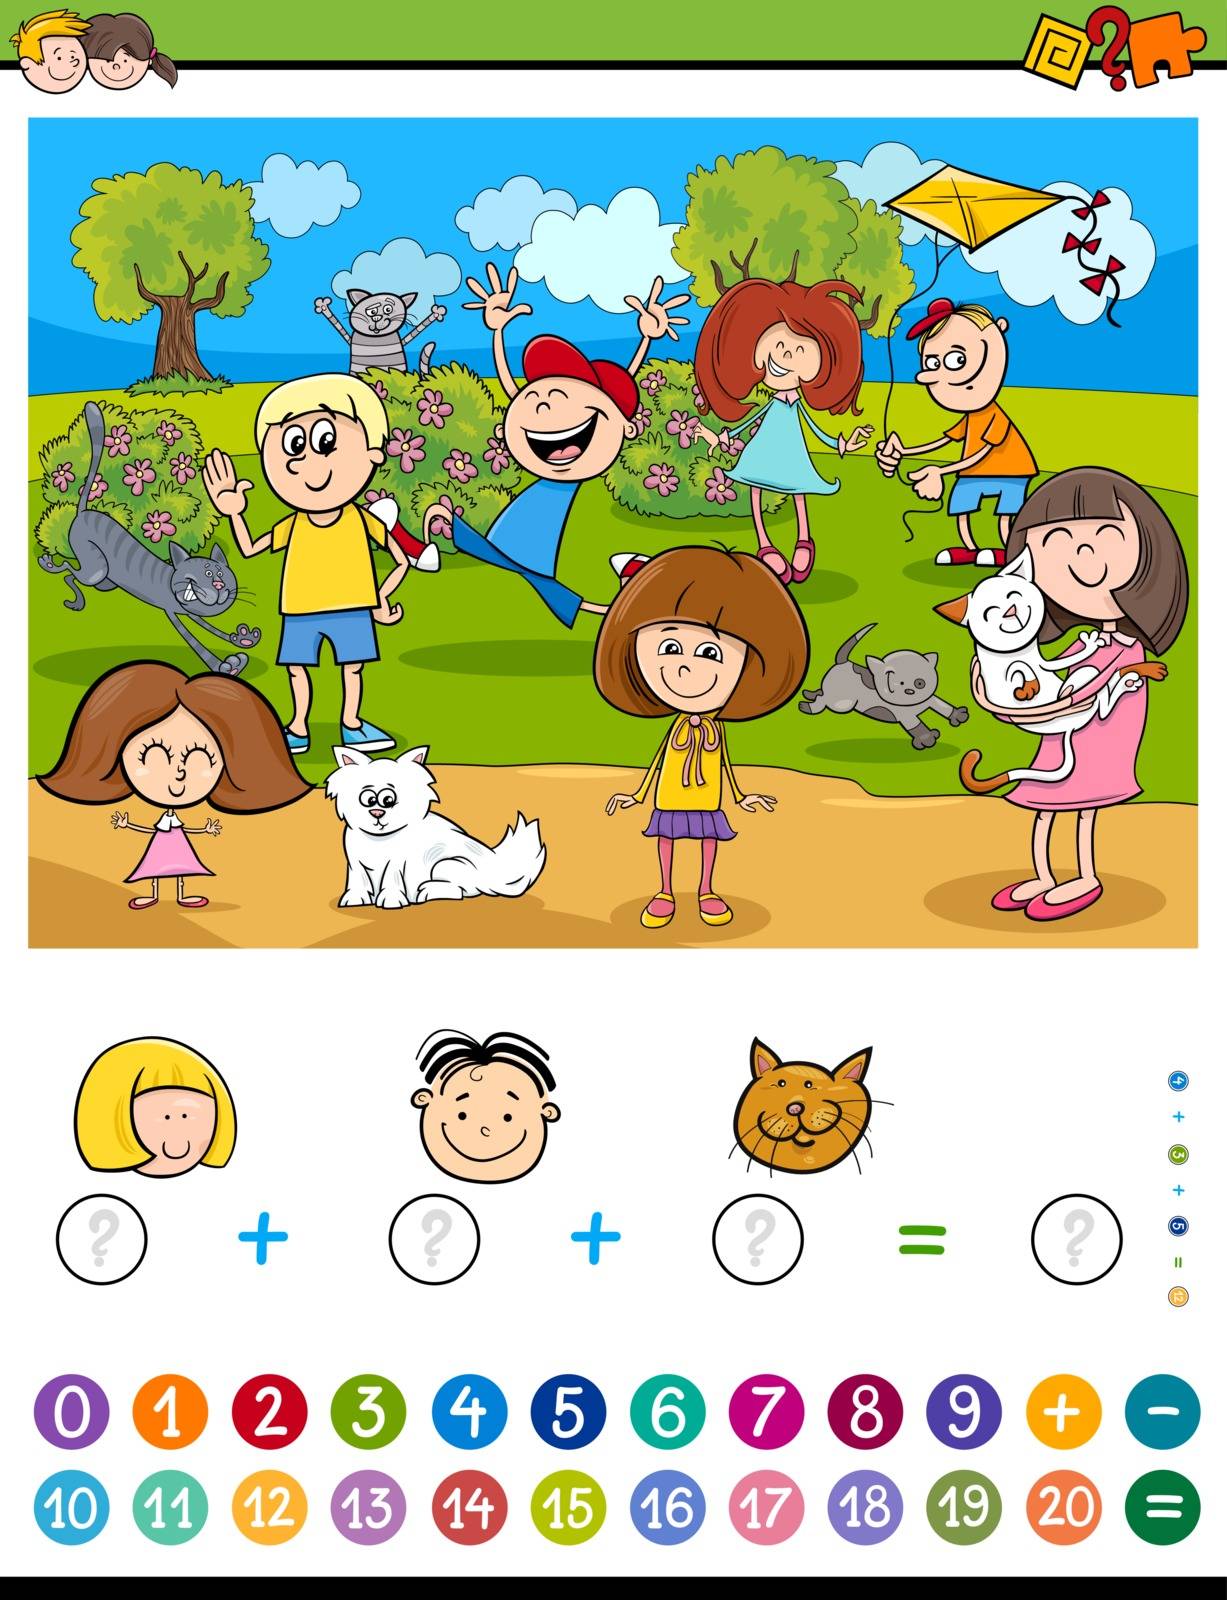 Cartoon Illustration of Educational Mathematical Counting and Addition Activity Task for Children with Kids and Cats